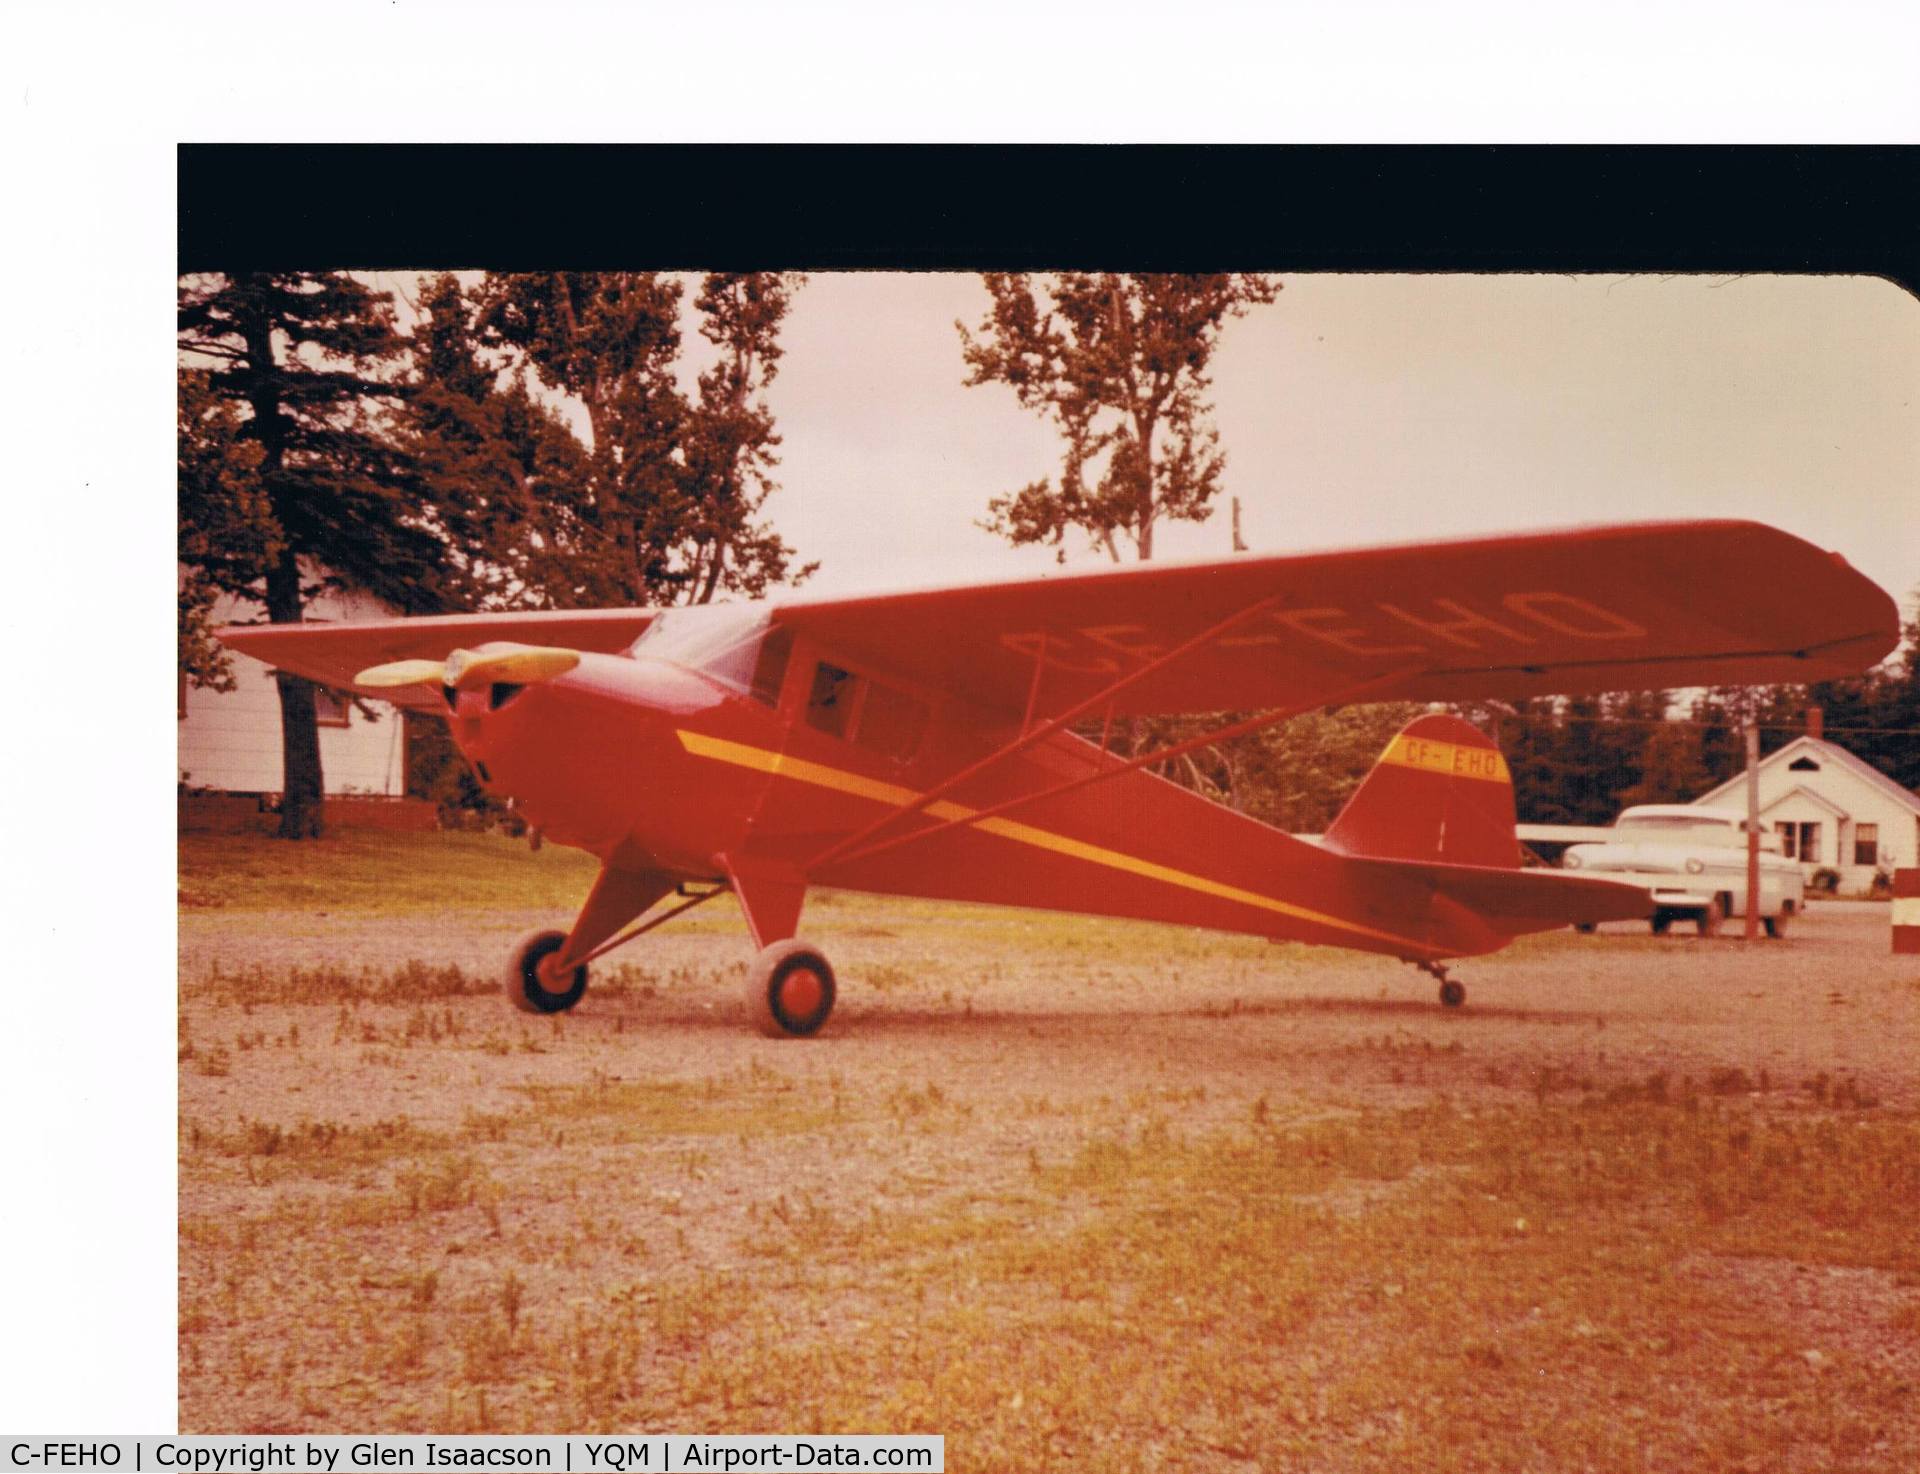 C-FEHO, 1946 Taylorcraft BC-12-D1X C/N 7778X, Rebuilt after crash landing, bought CF-EHO in 1957 or 58 in Moncton.
Wonderful little plane. Sold it in 1959.